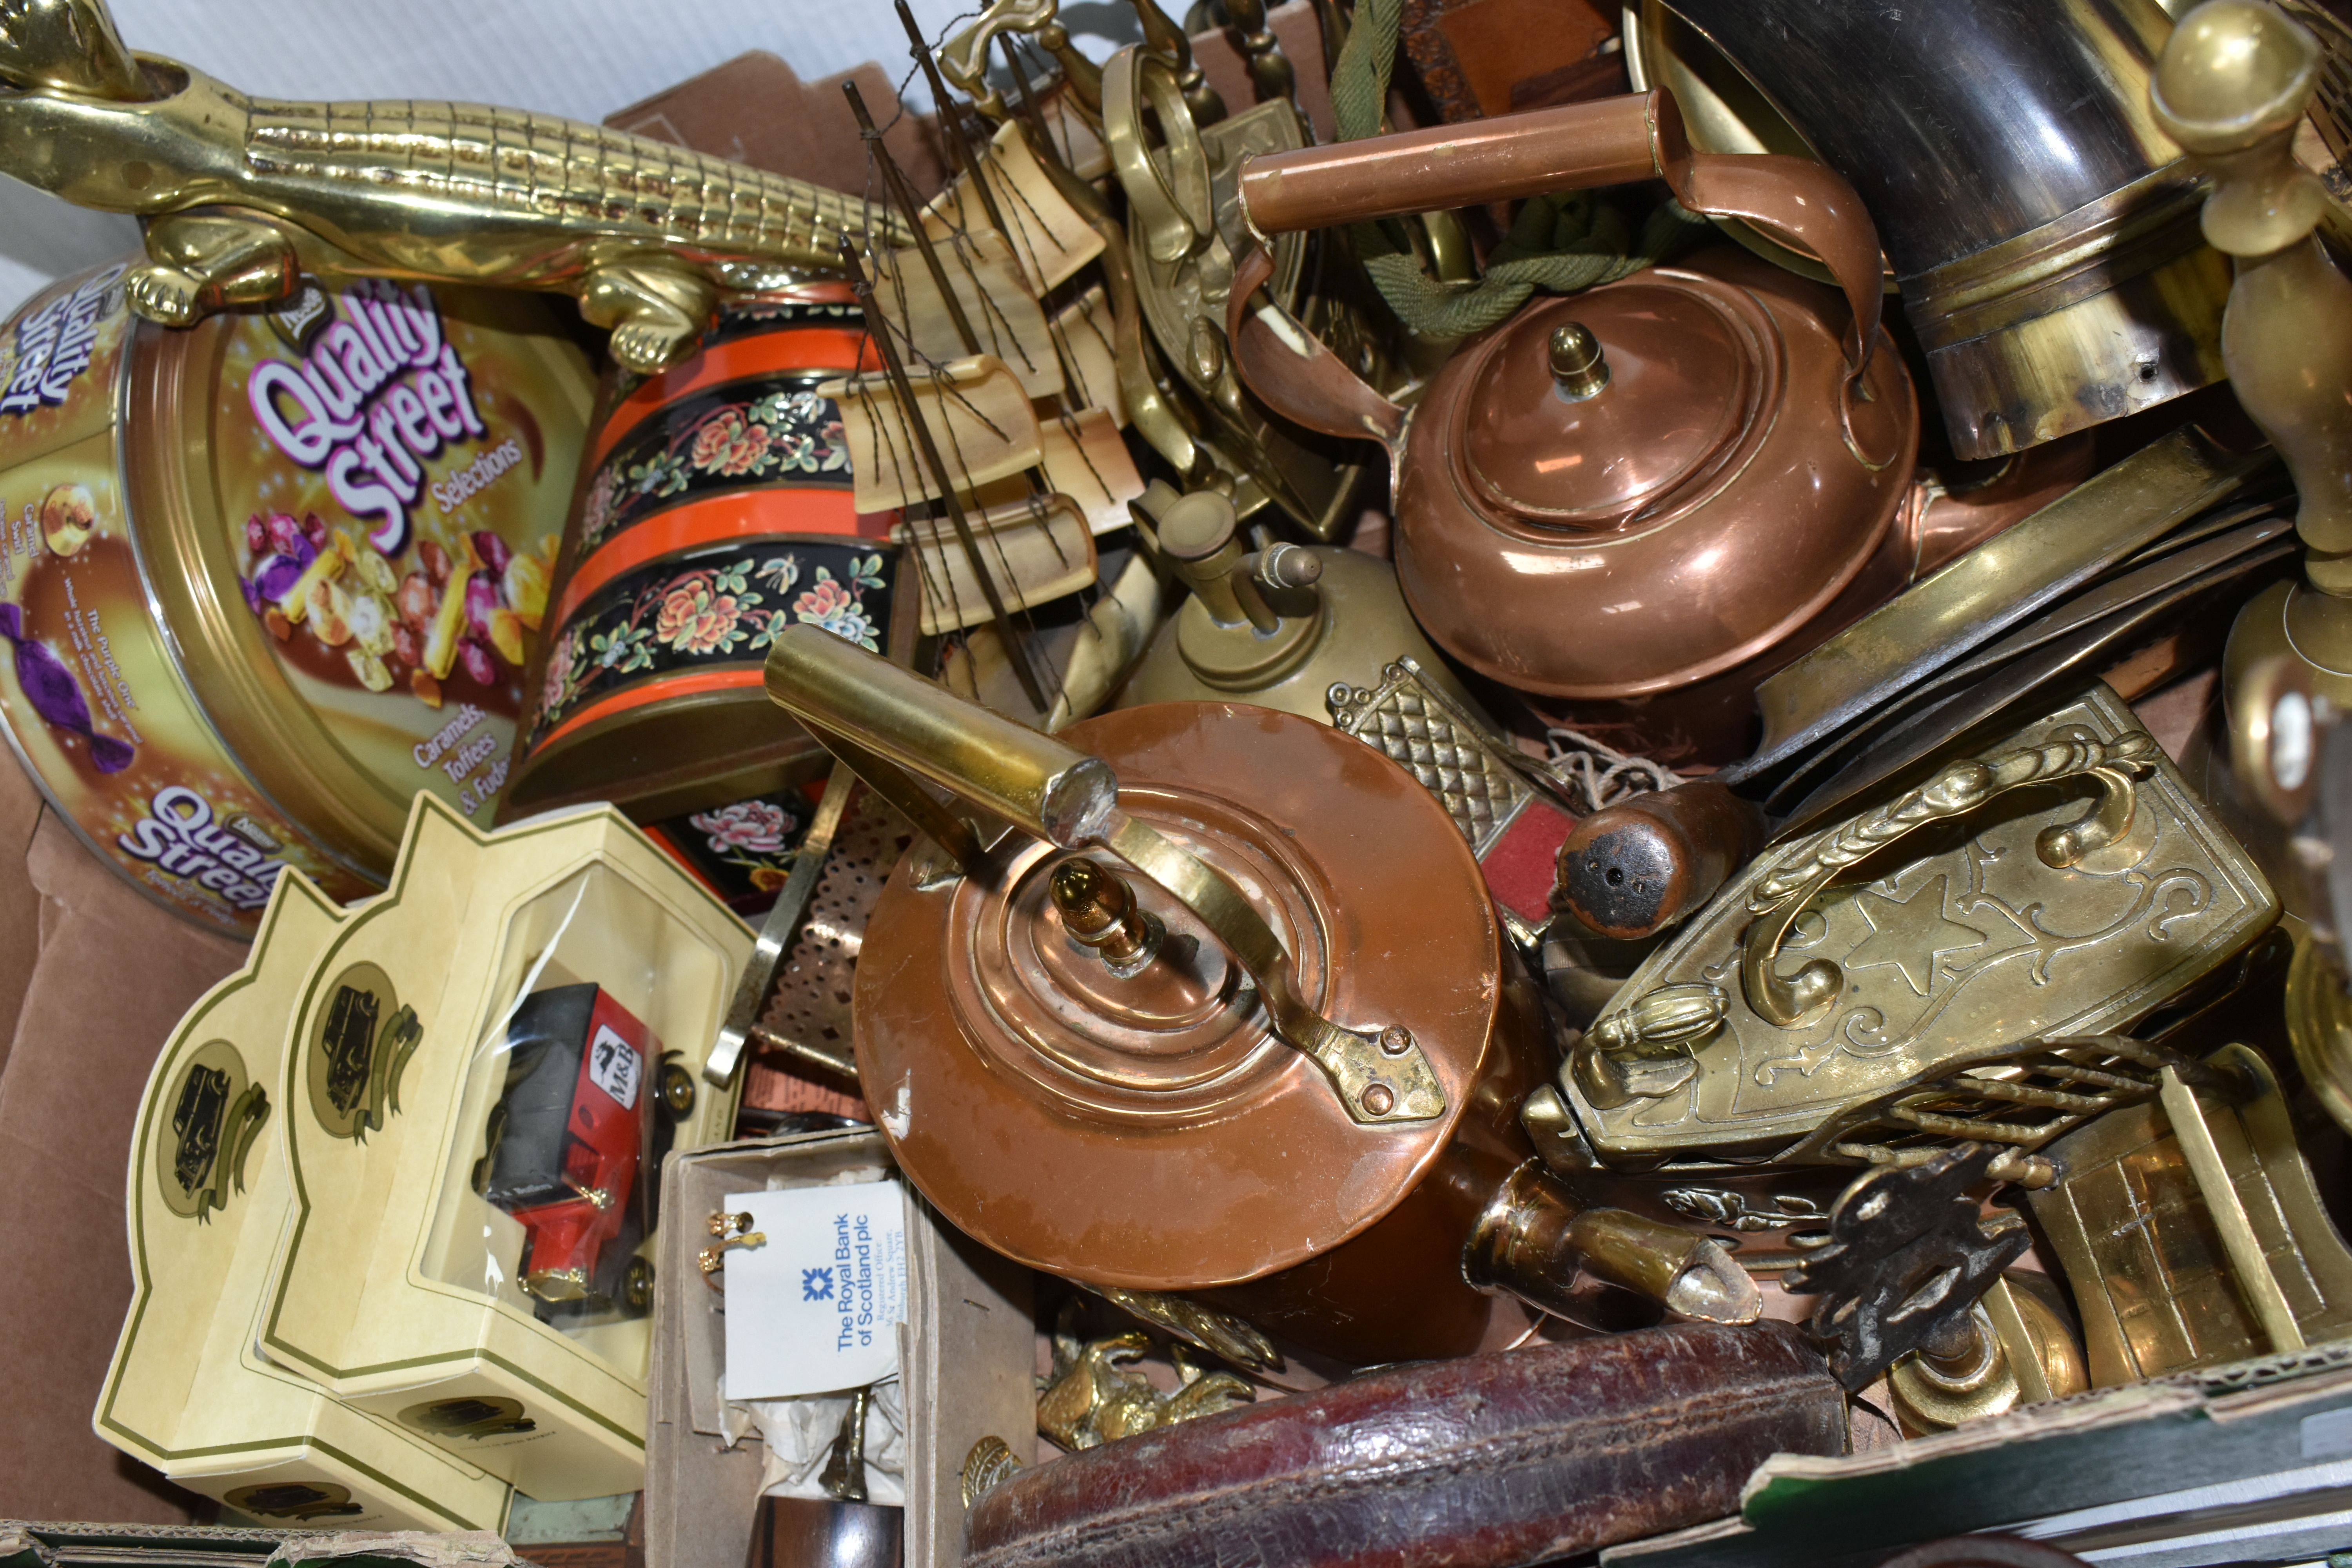 A BOX AND LOOSE METALWARE AND SUNDRY ITEMS, to include two small copper kettles, a horn made from - Image 9 of 9